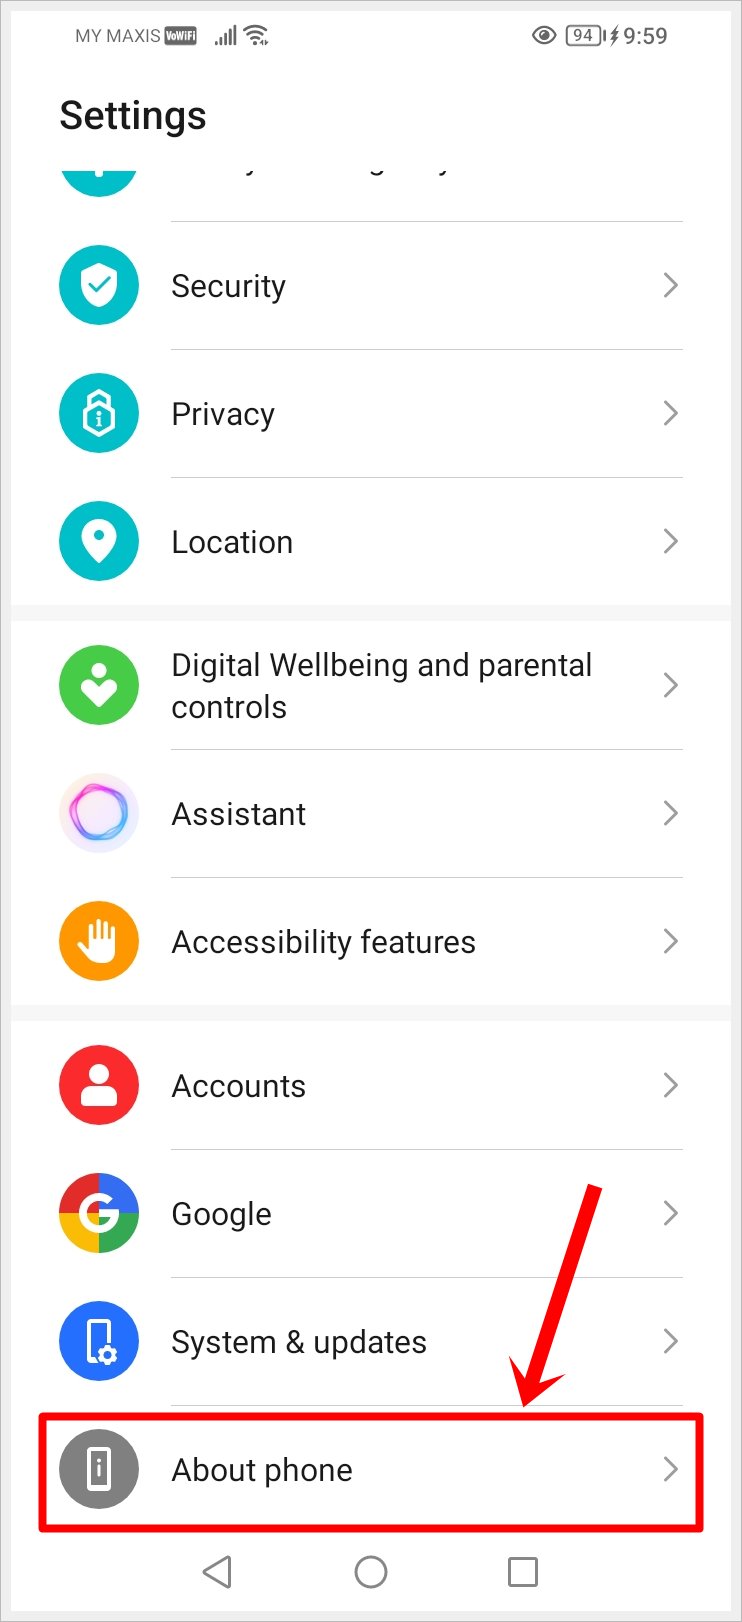 This image shows a screenshot of the 'Settings' page of an Android phone. The 'About Phone' option is highlighted.